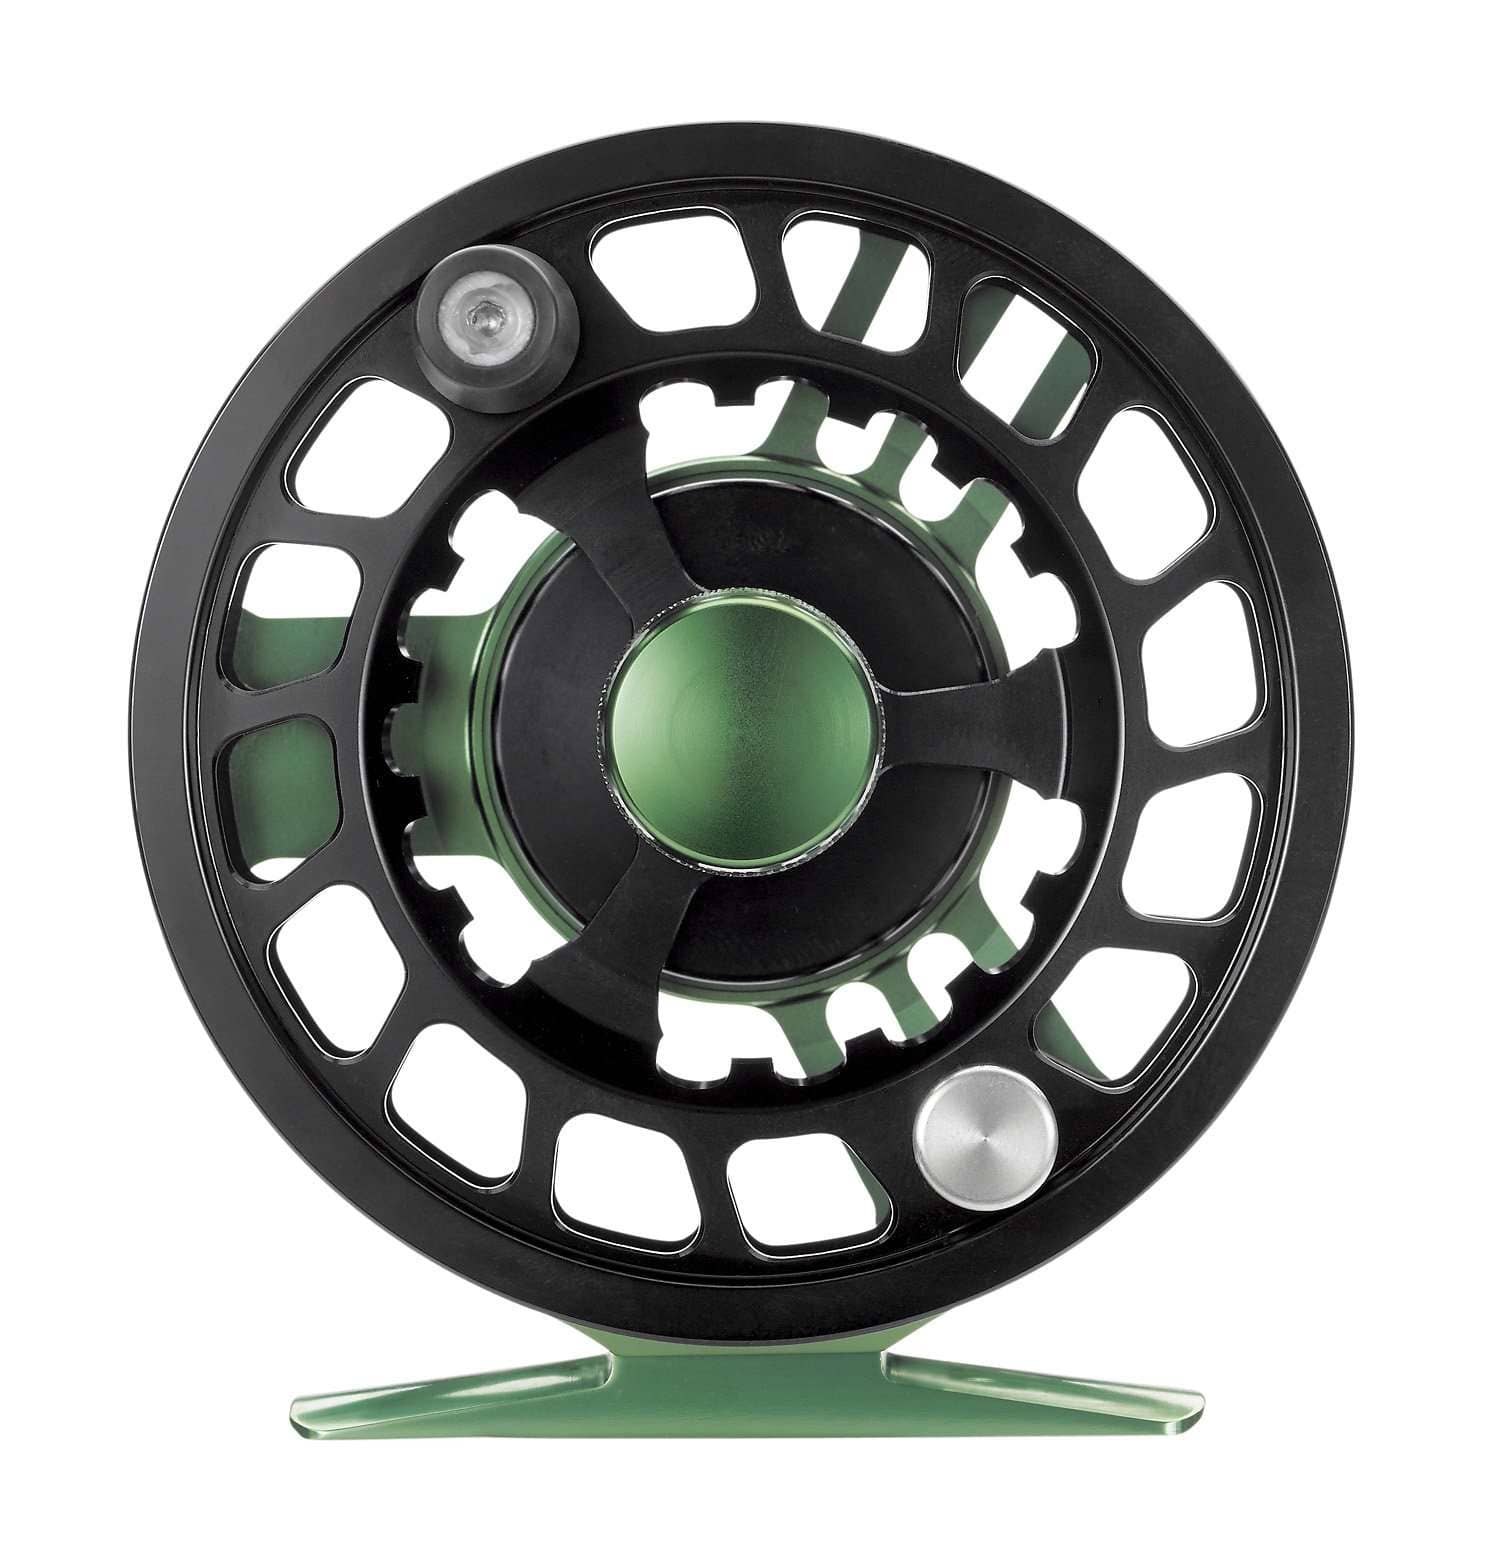 Get Launch 325 Fly Fishing Reels Online - Cheeky Fishing